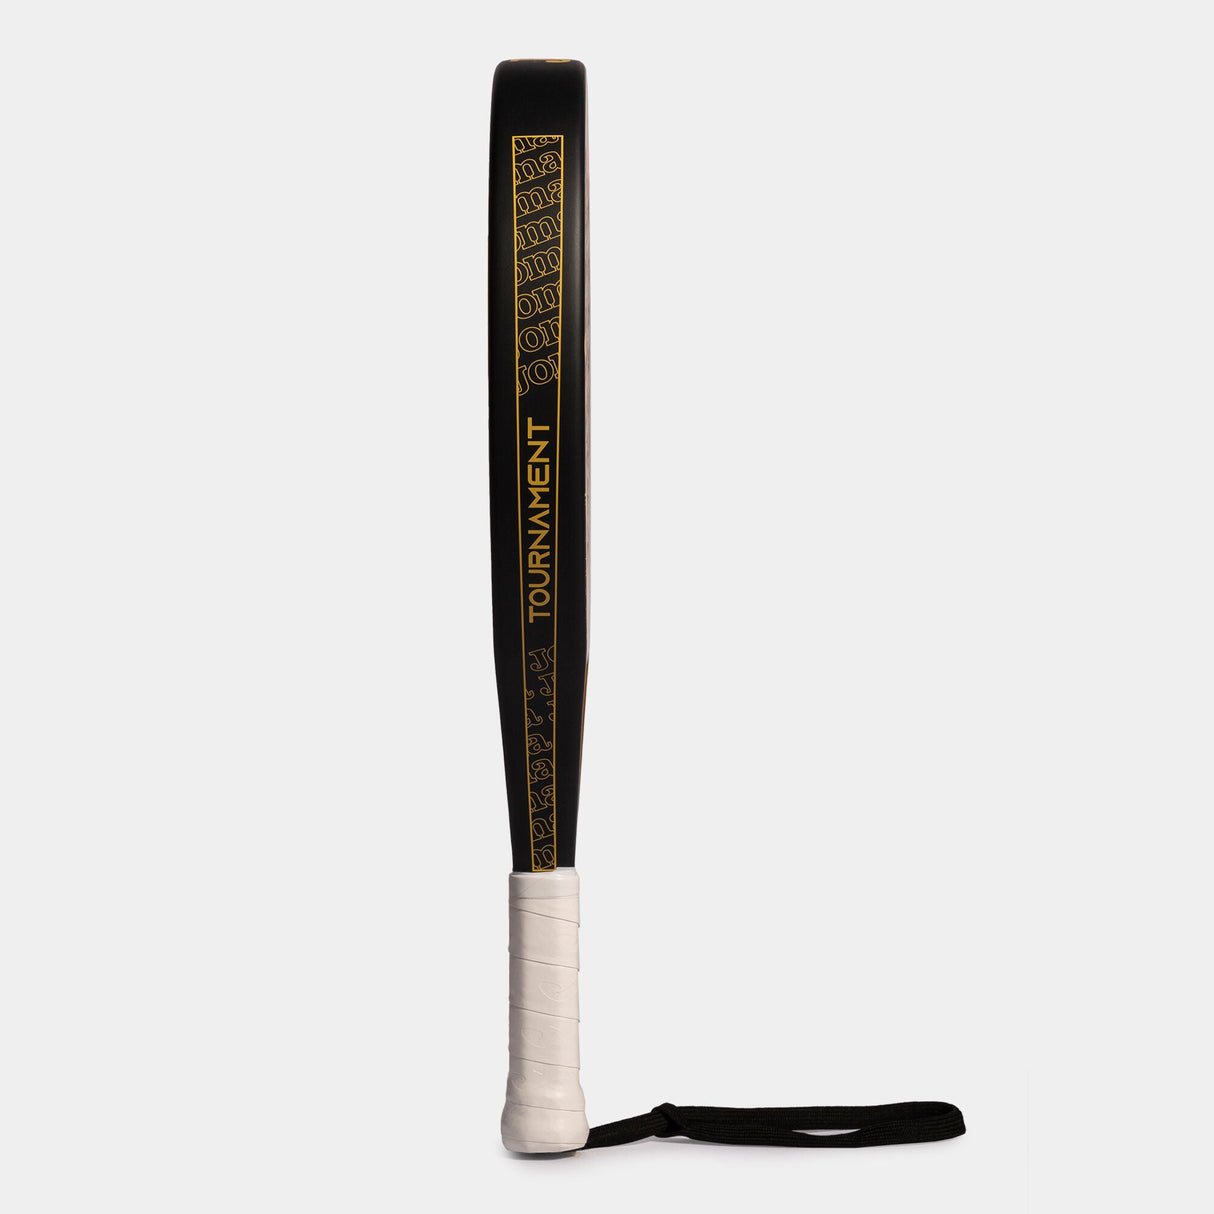 Joma Tournament Paddle Racket - Black/Gold/Red